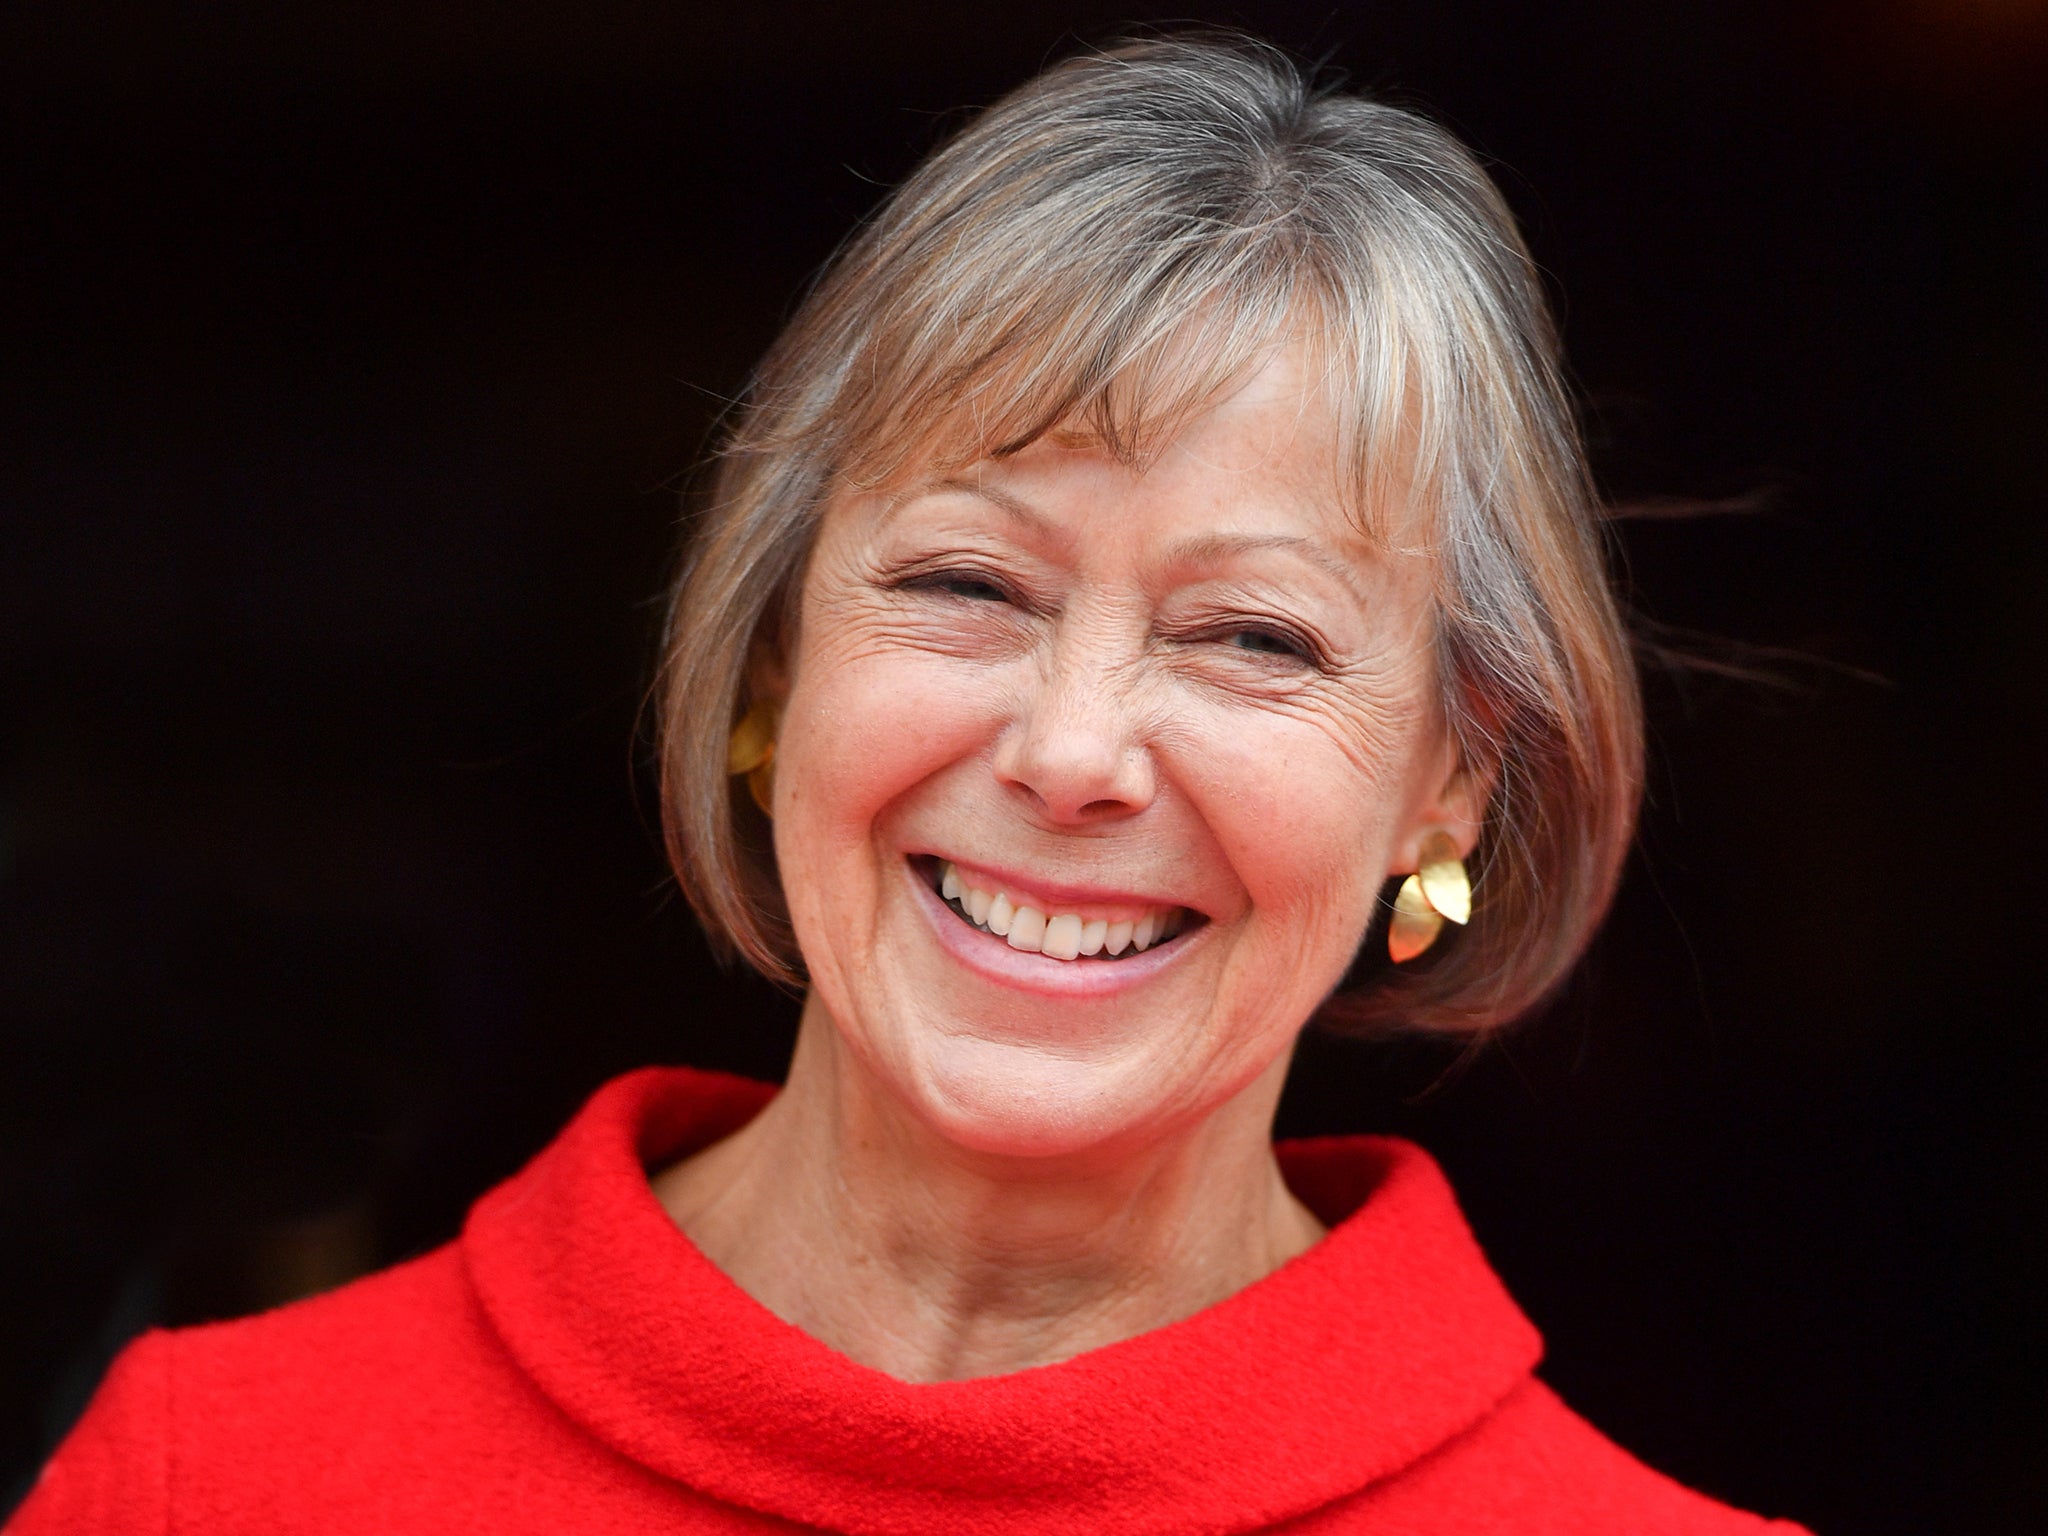 Jenny Agutter interview I was a 16-year-old and I felt very uncomfortable about being naked The Independent pic